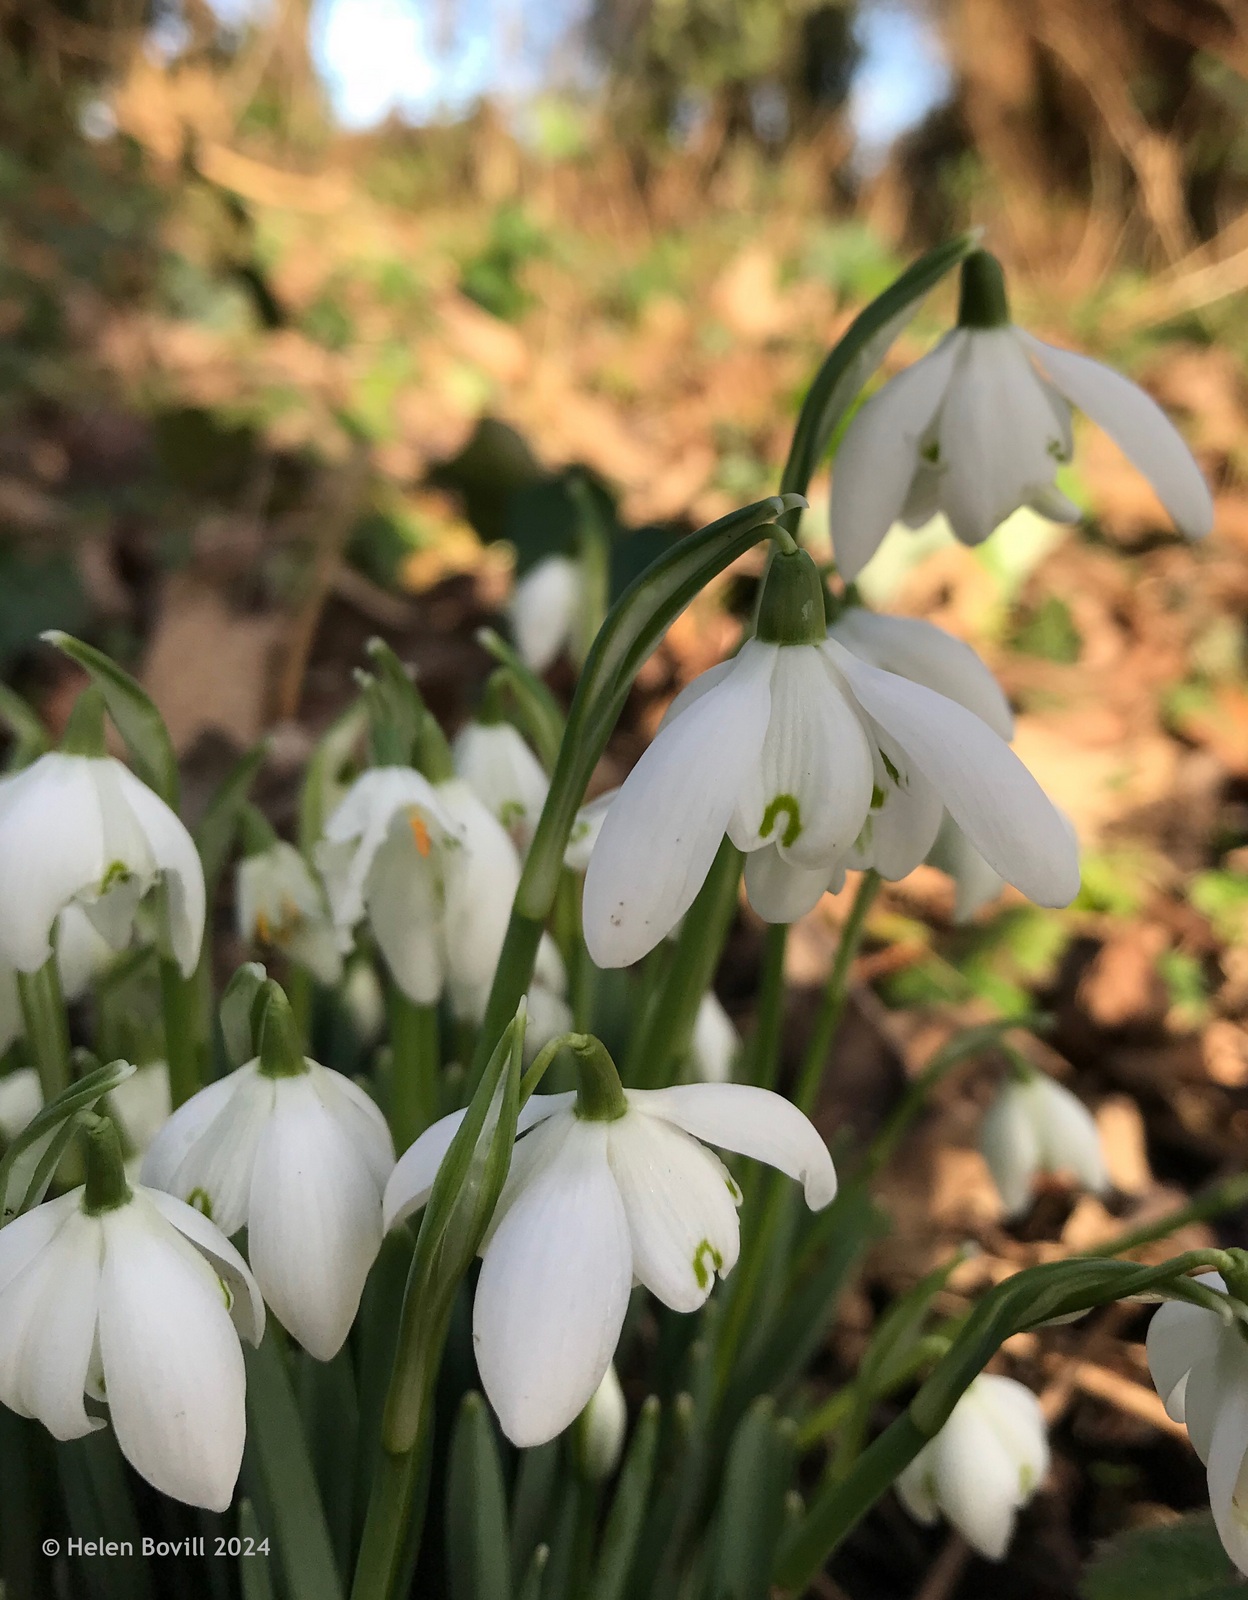  A group of snowdrops with double petals